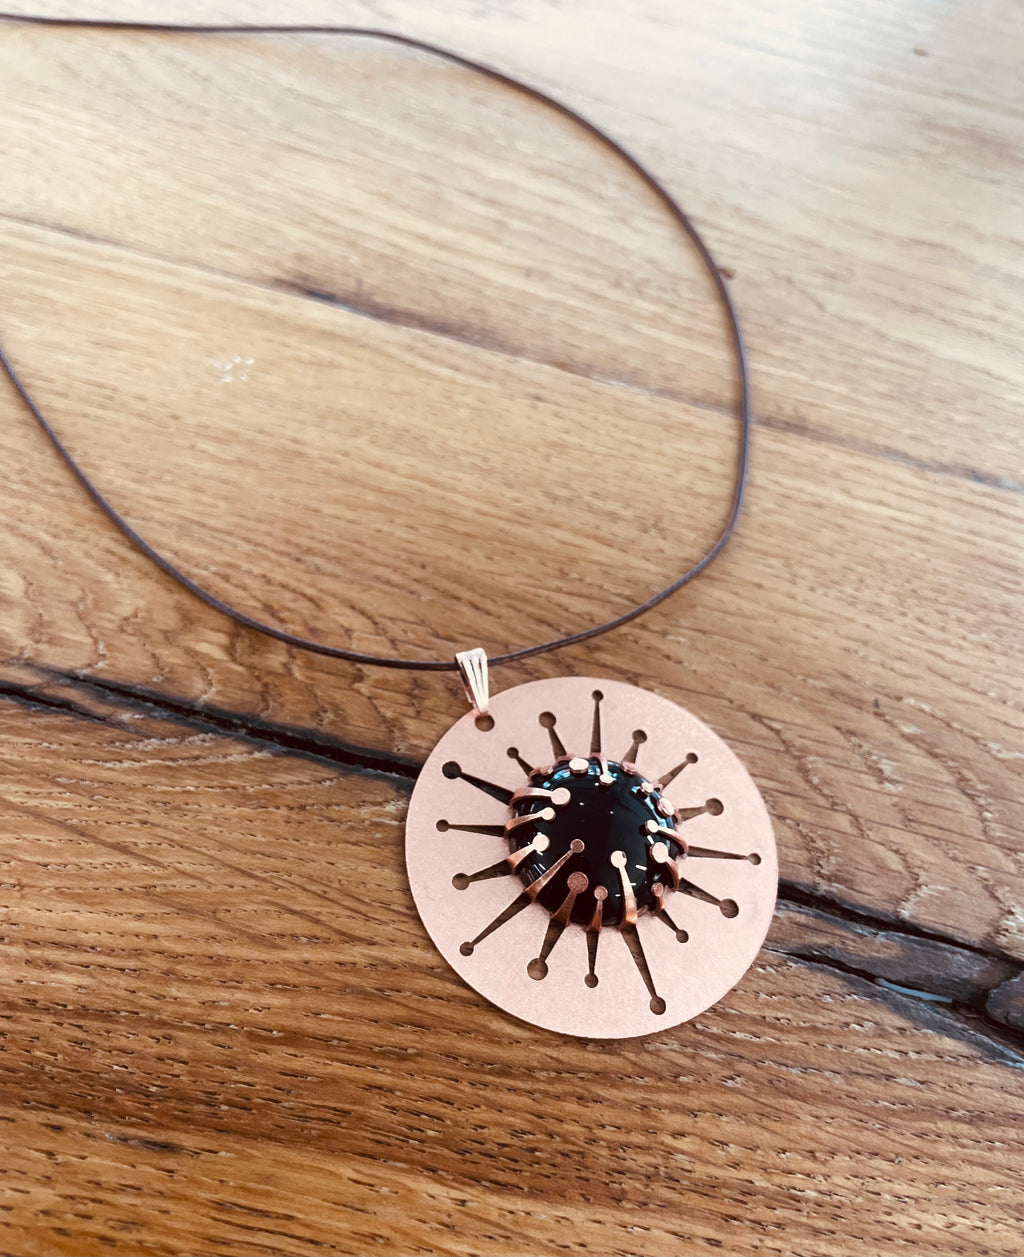 Round copper necklace with a stone